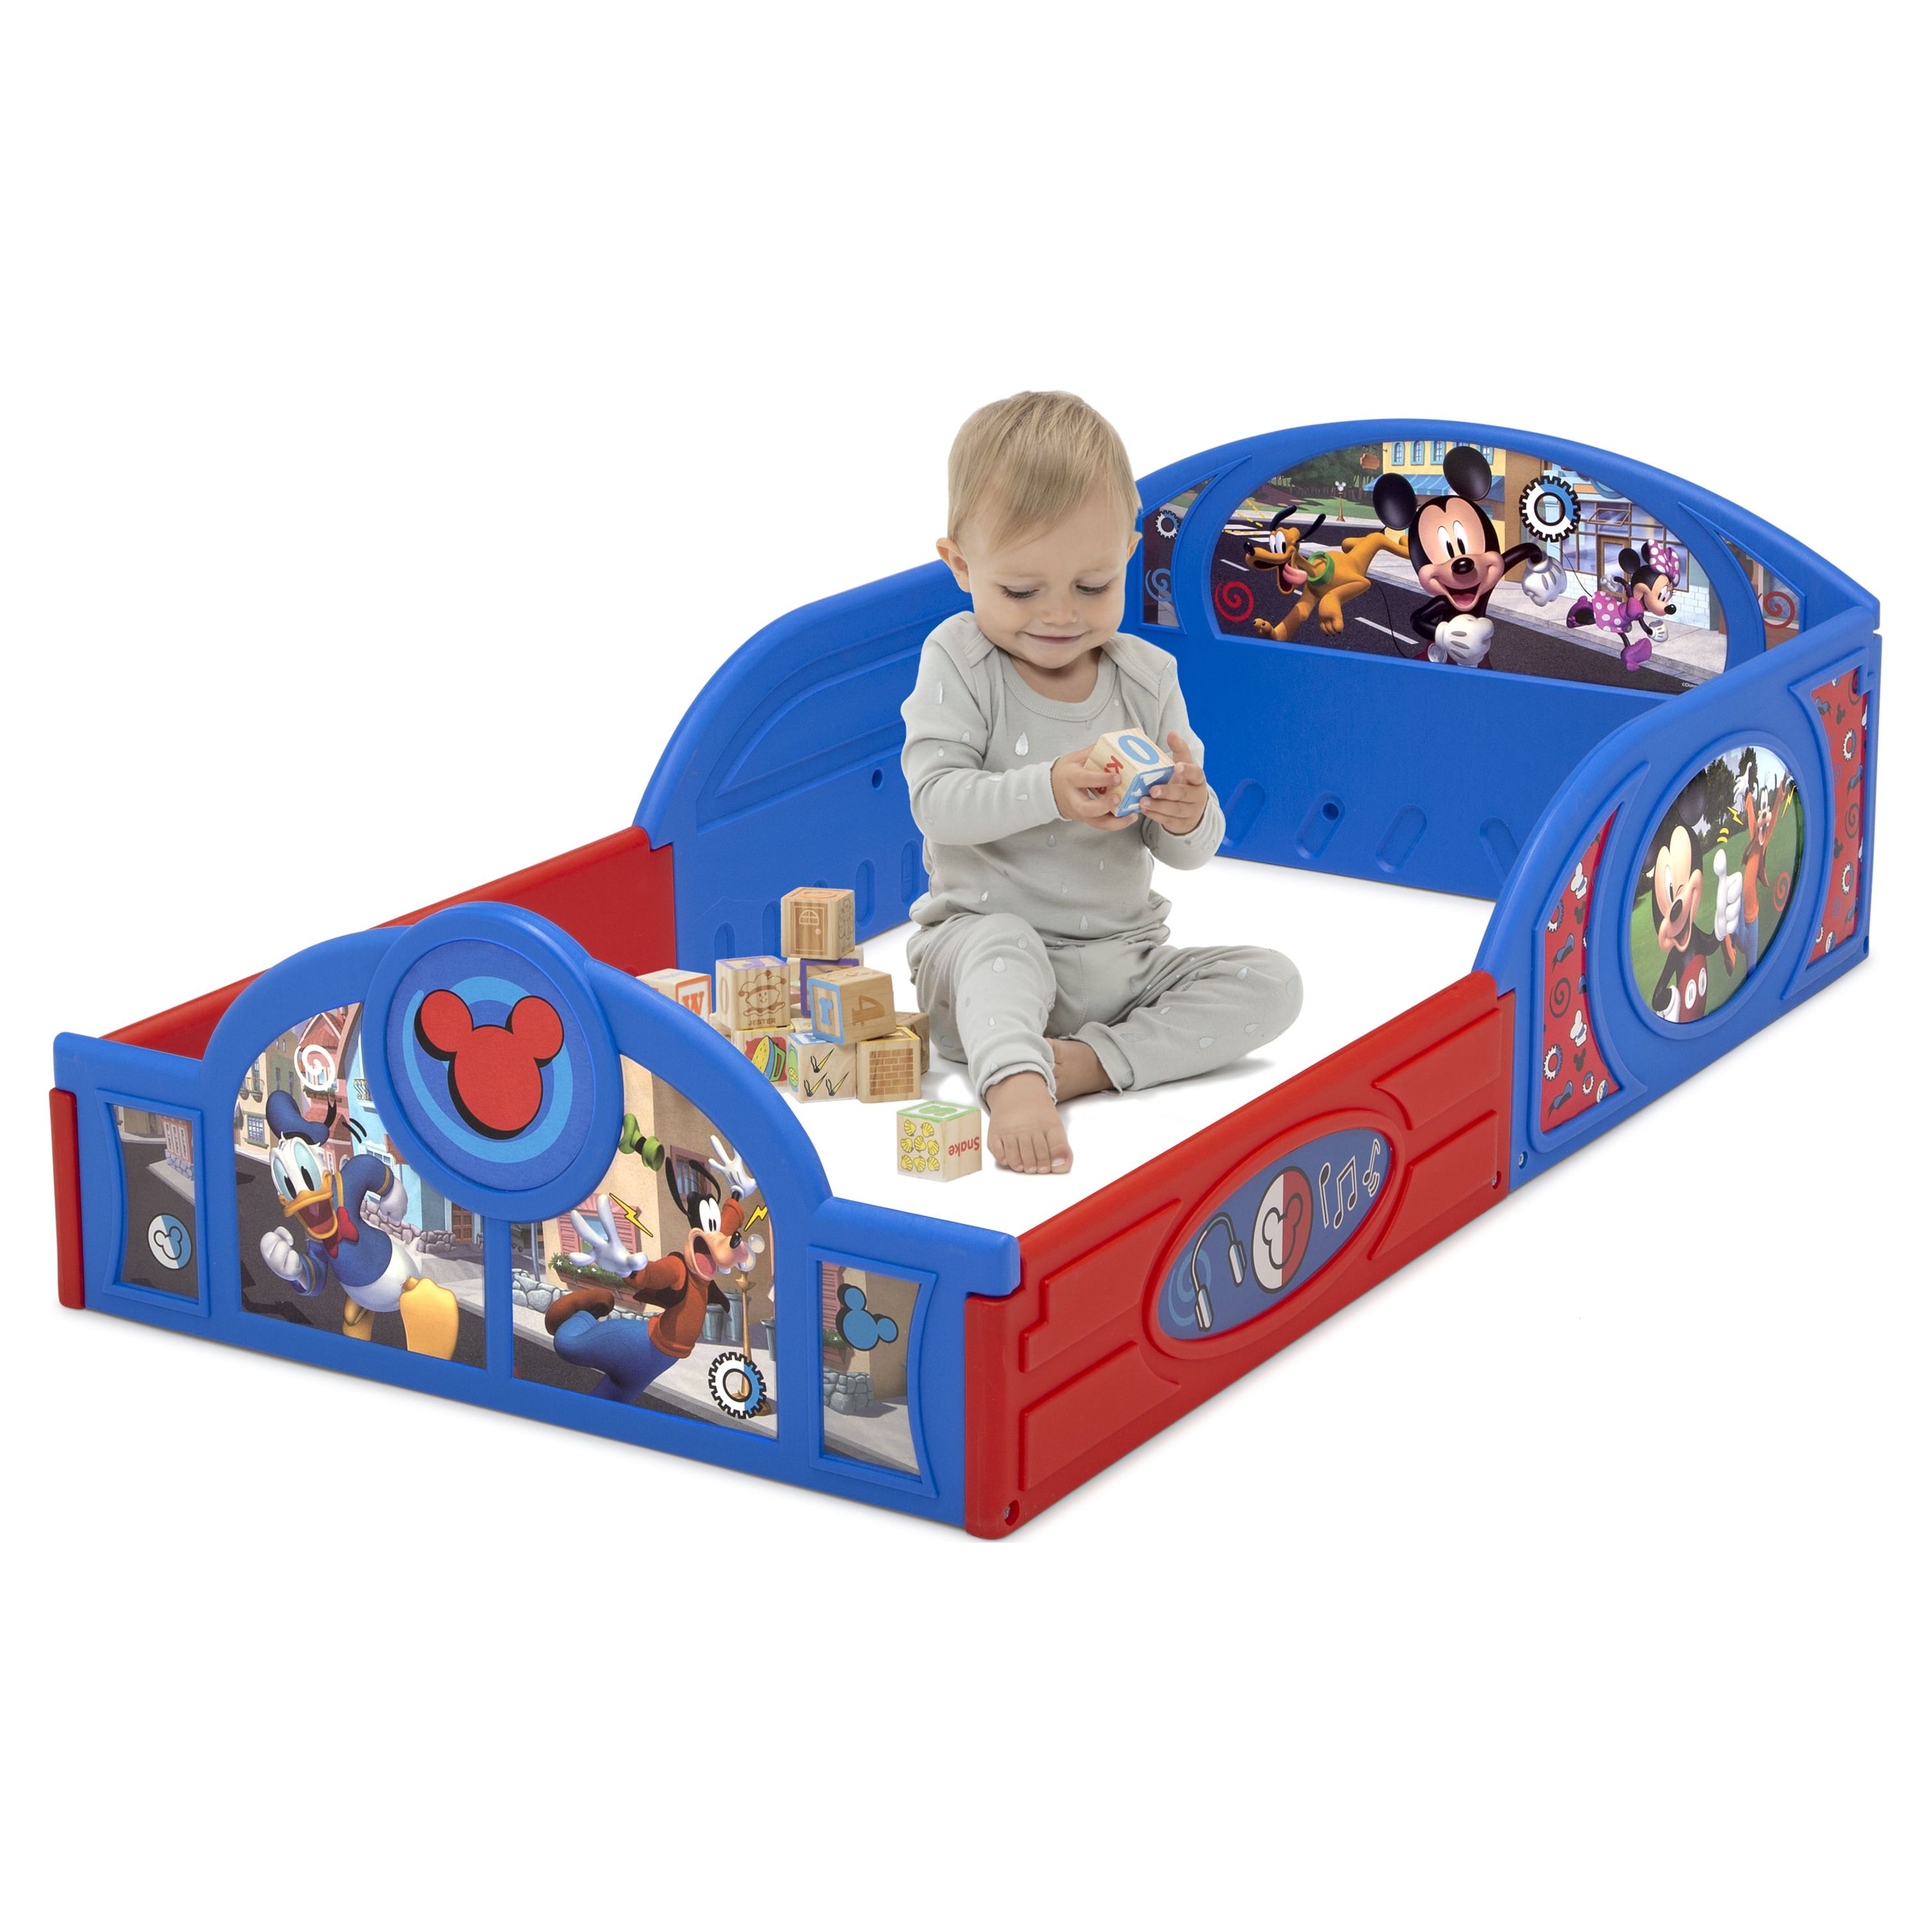 Disney Mickey Mouse 4-Piece Room-in-a-Box - Toddler Bedroom Set - image 11 of 20